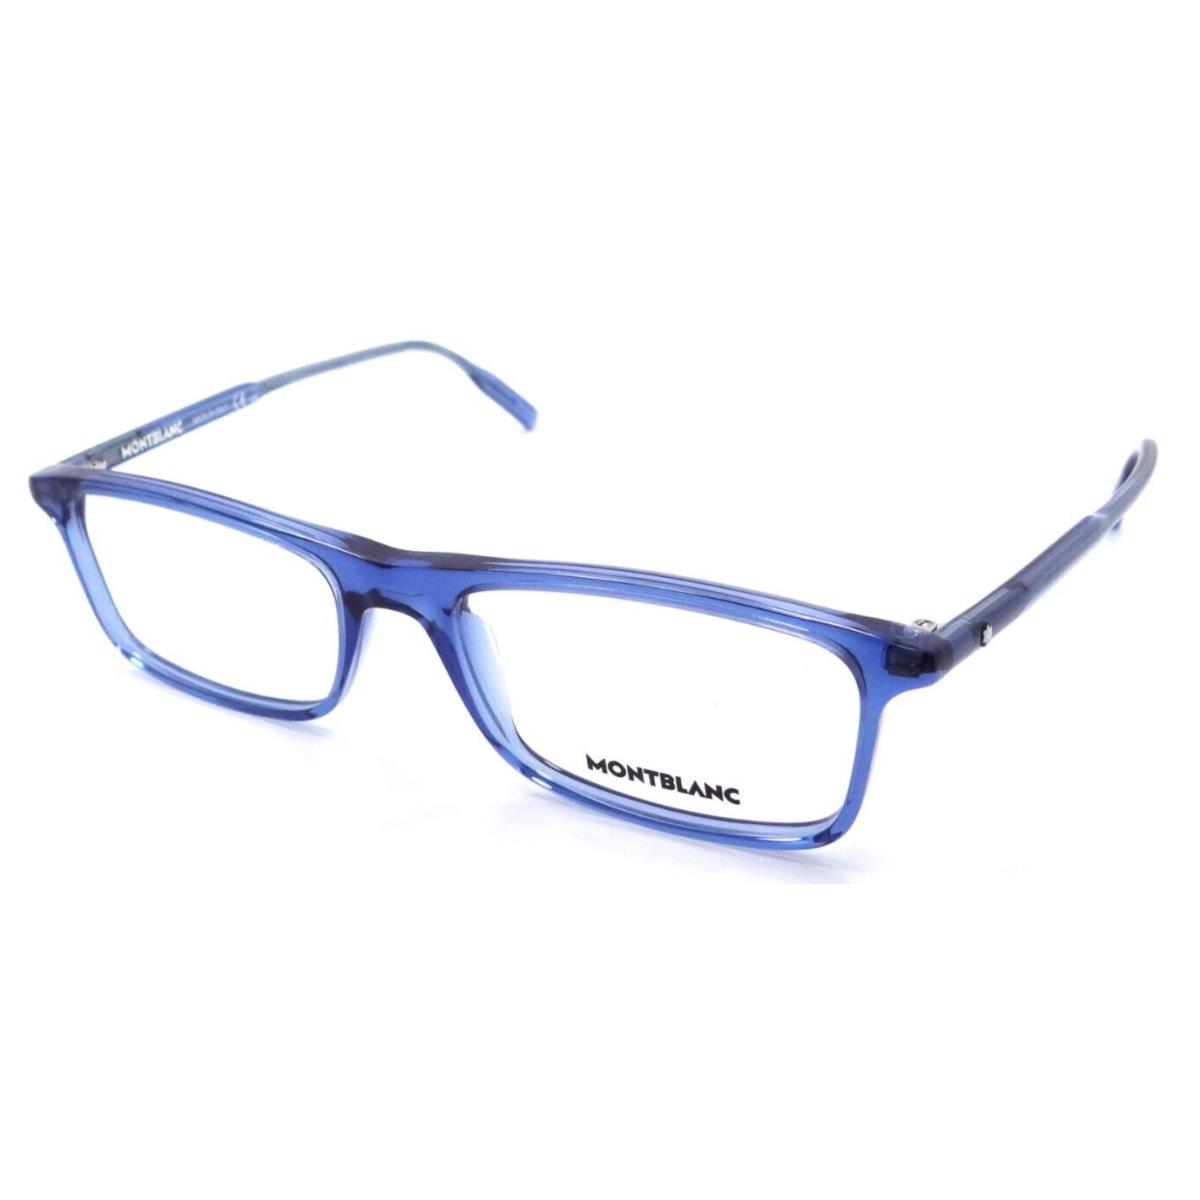 Montblanc Eyeglasses Frames MB0086O 004 54-18-150 Blue Made in Italy